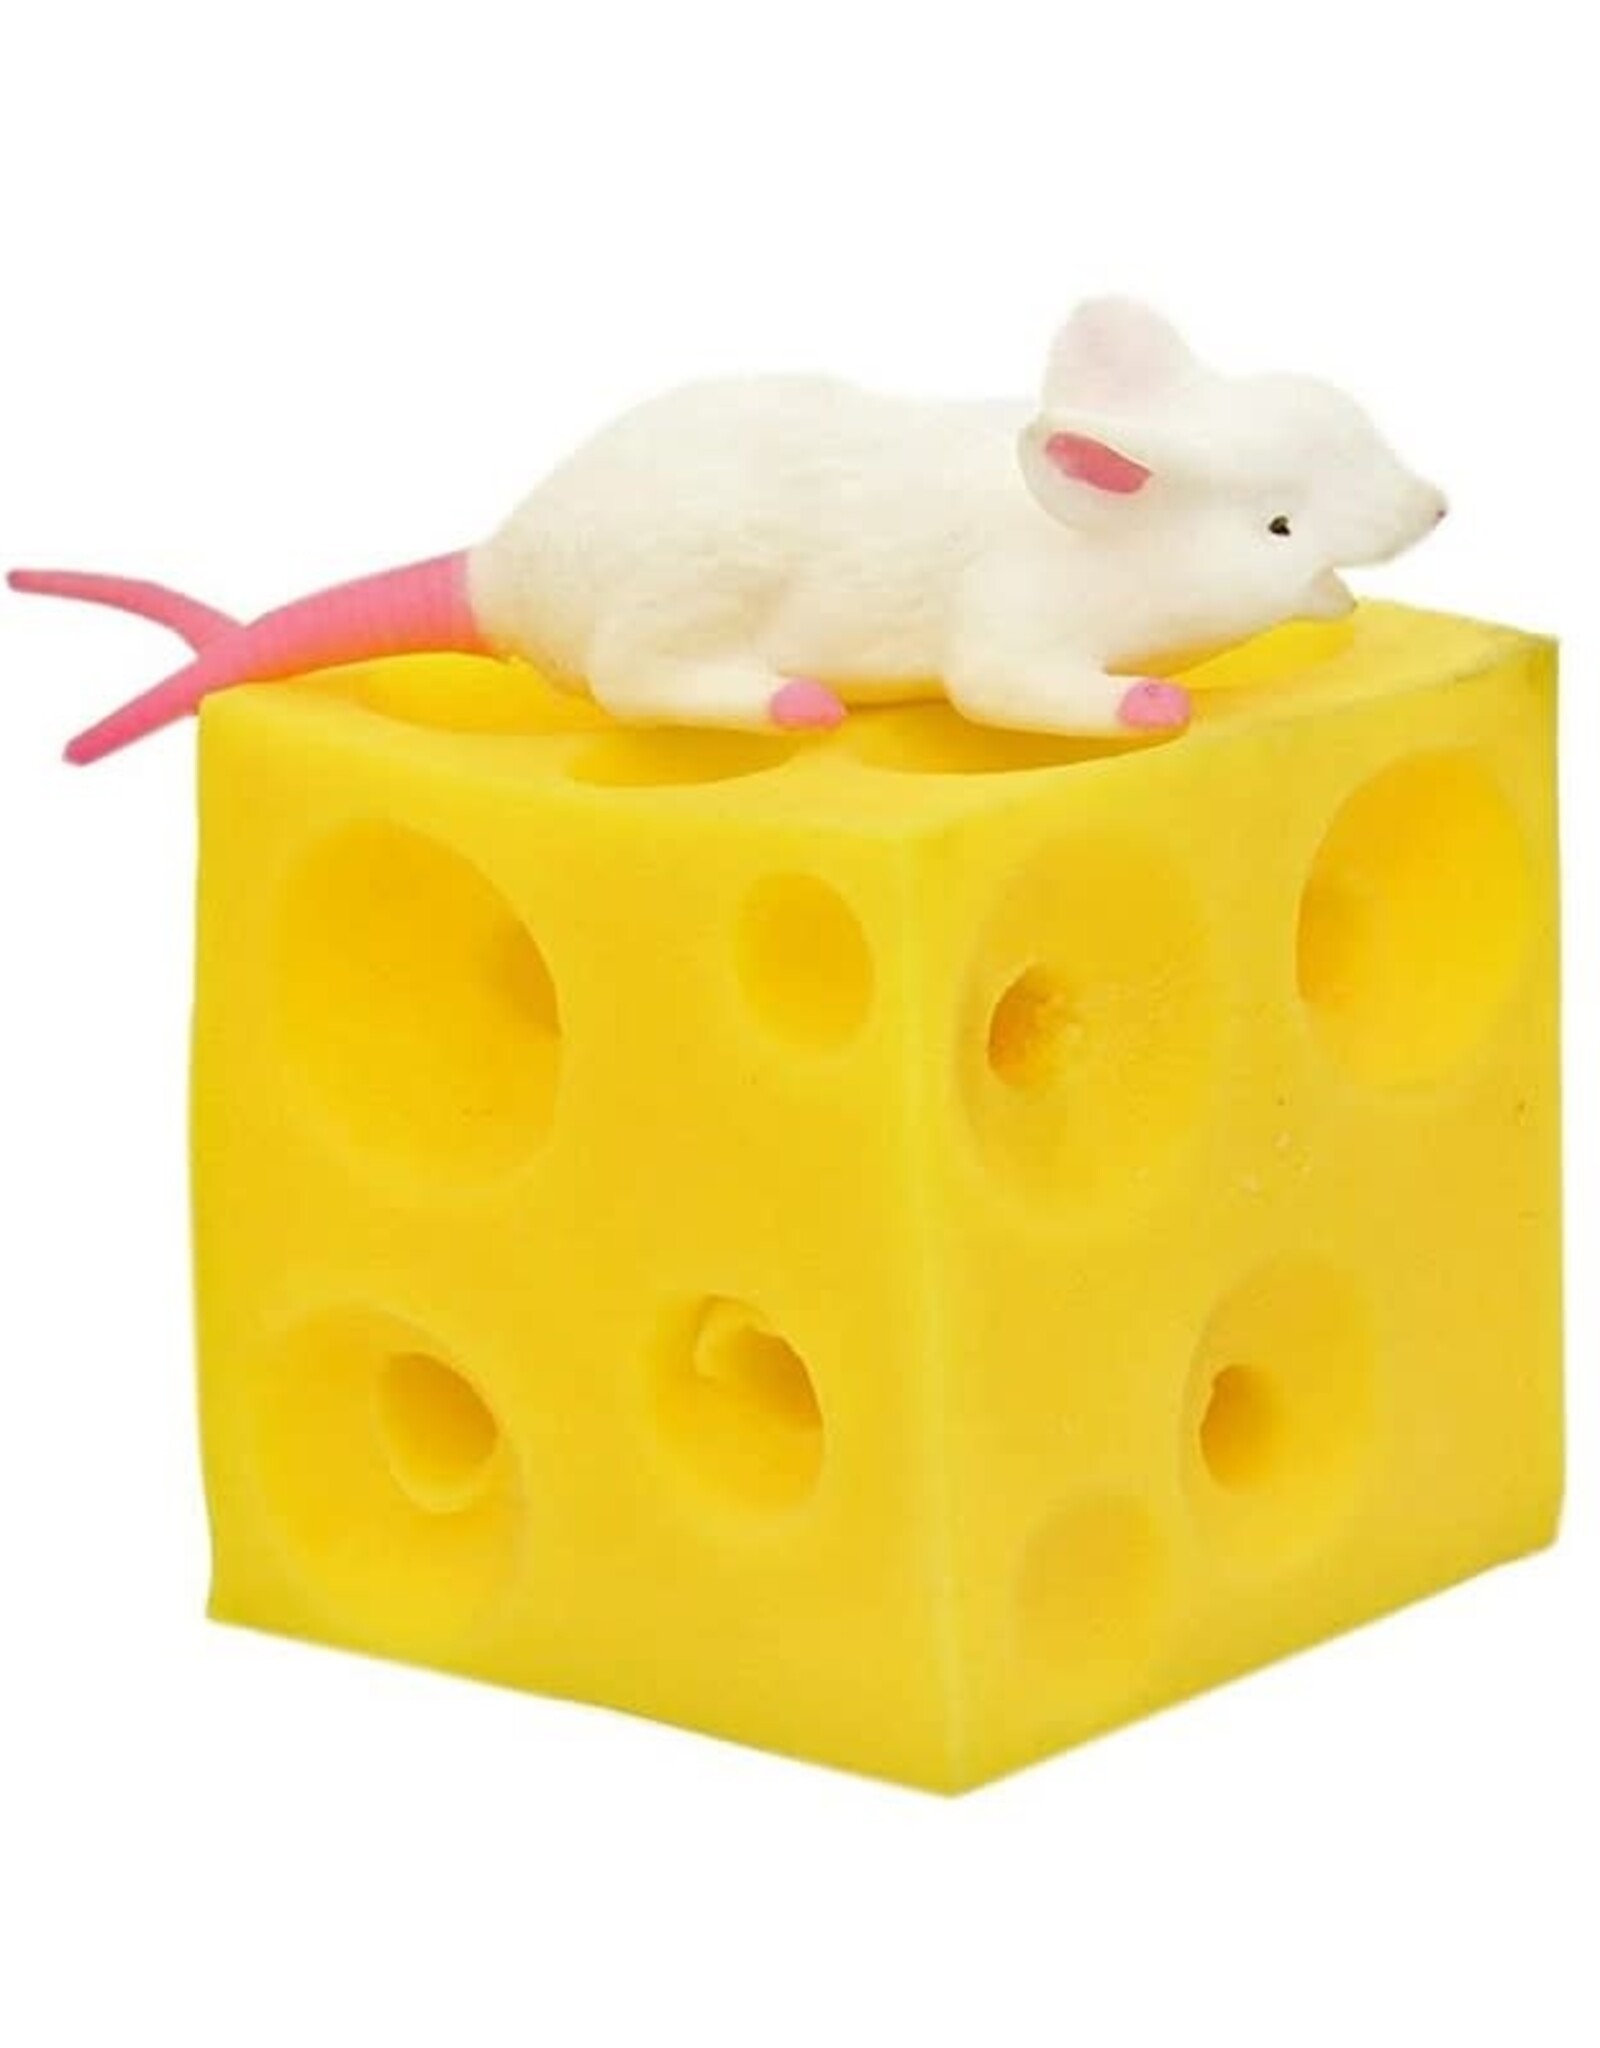 HyperFlex Stretchy Mice and Cheese